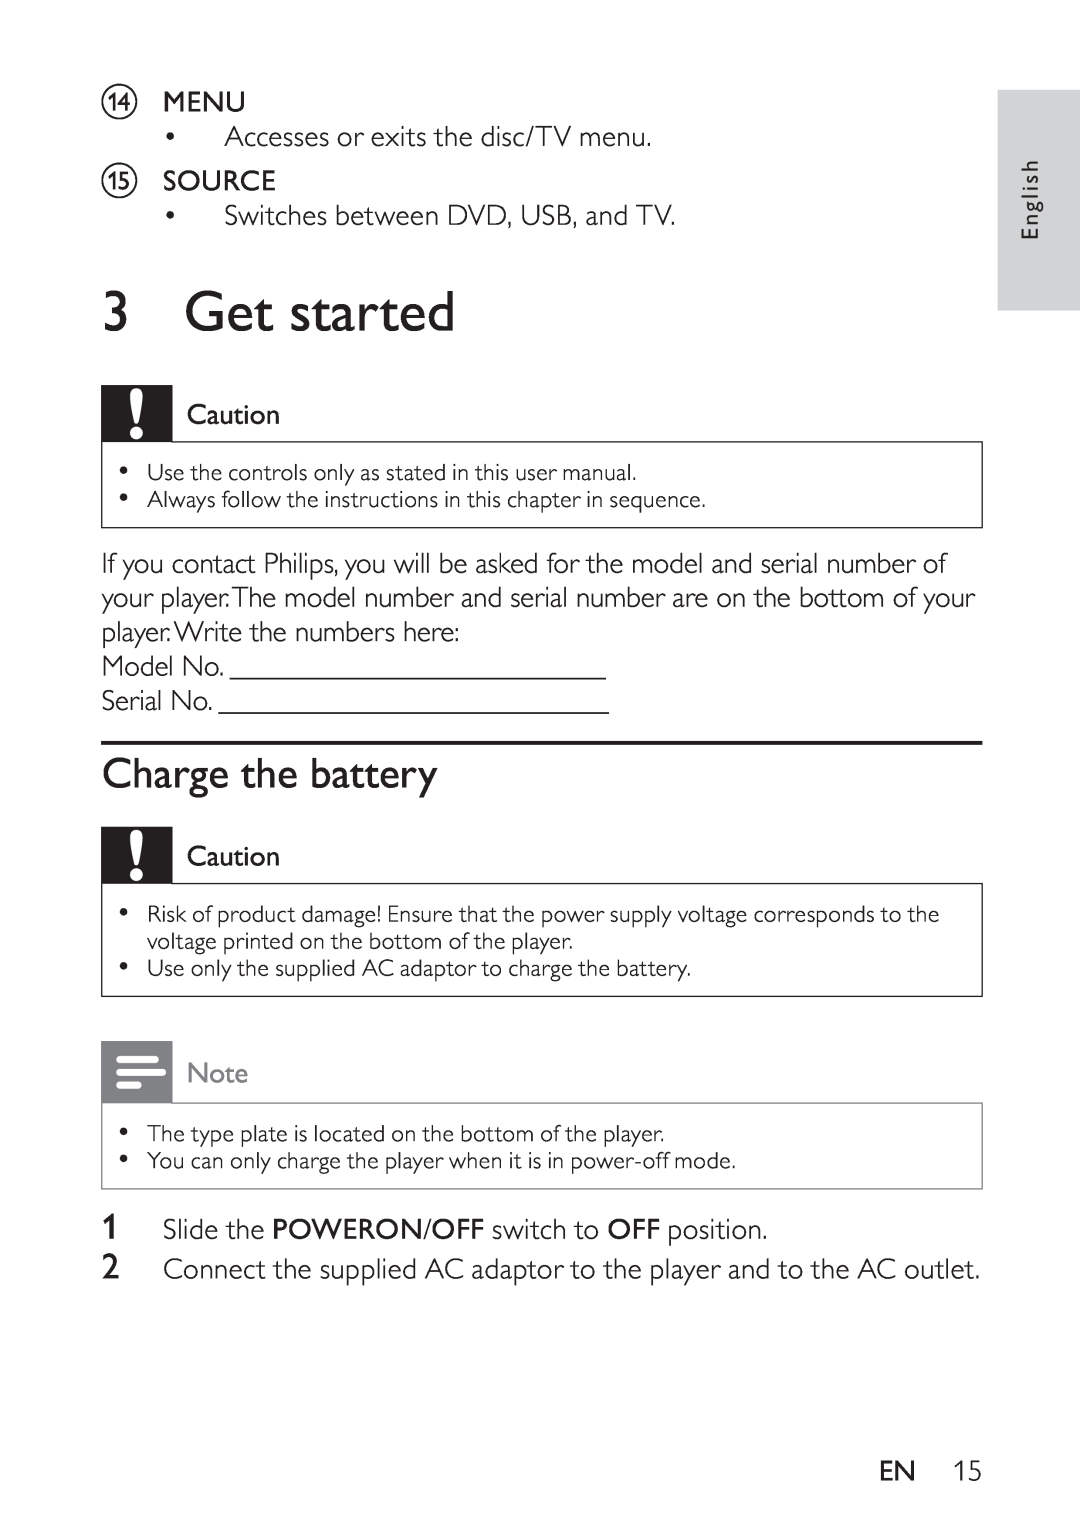 Philips PET748/58 user manual Get started, Charge the battery 